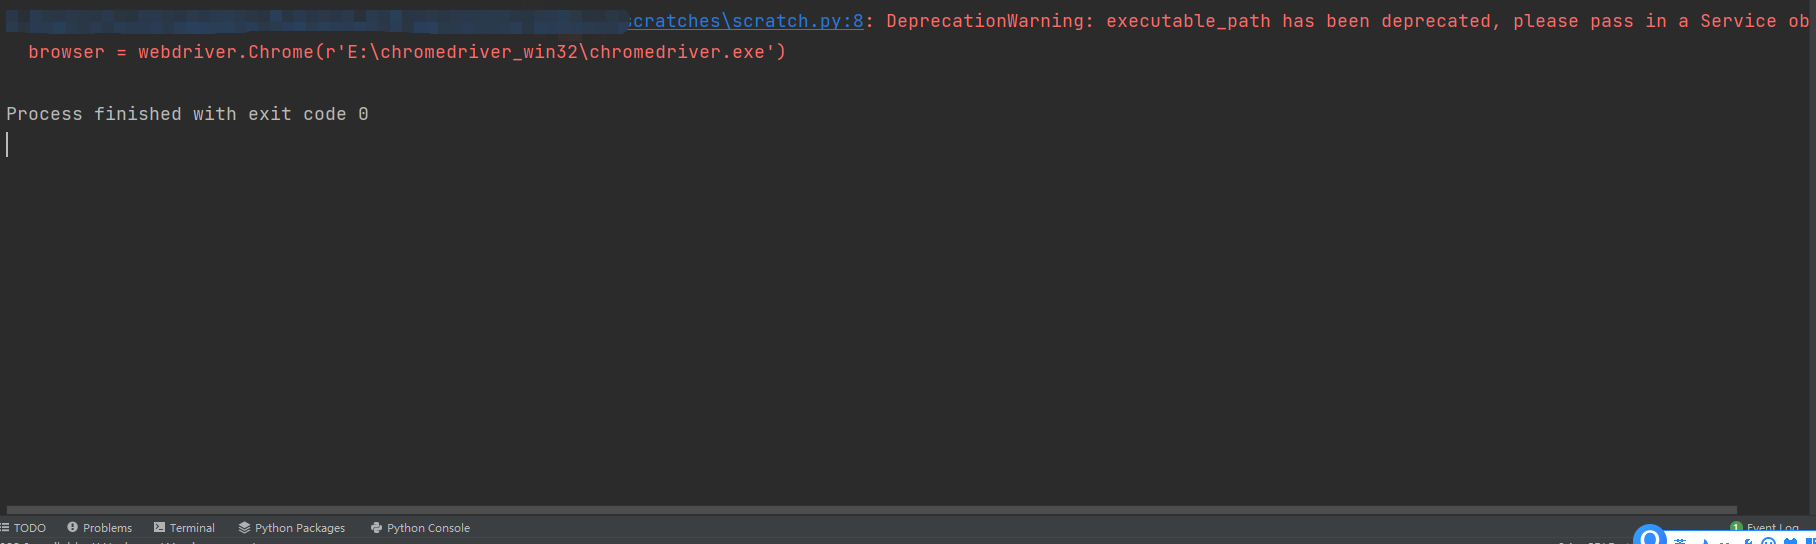 DeprecationWarning: executable_path has been deprecated, please pass in a Service object